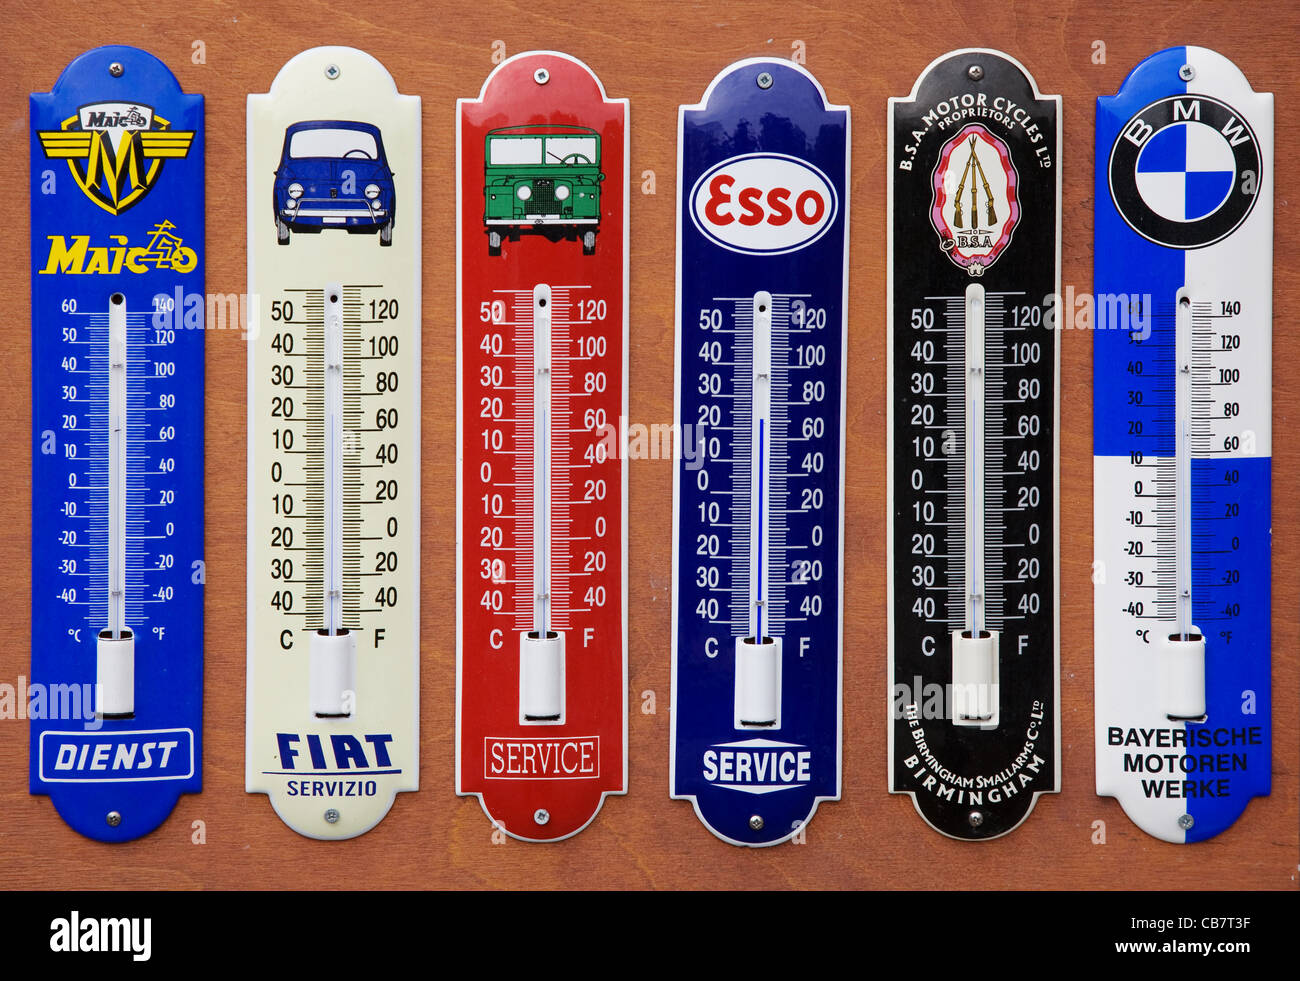 https://c8.alamy.com/comp/CB7T3F/a-vintage-thermometer-array-in-display-amsterdam-the-netherlands-CB7T3F.jpg